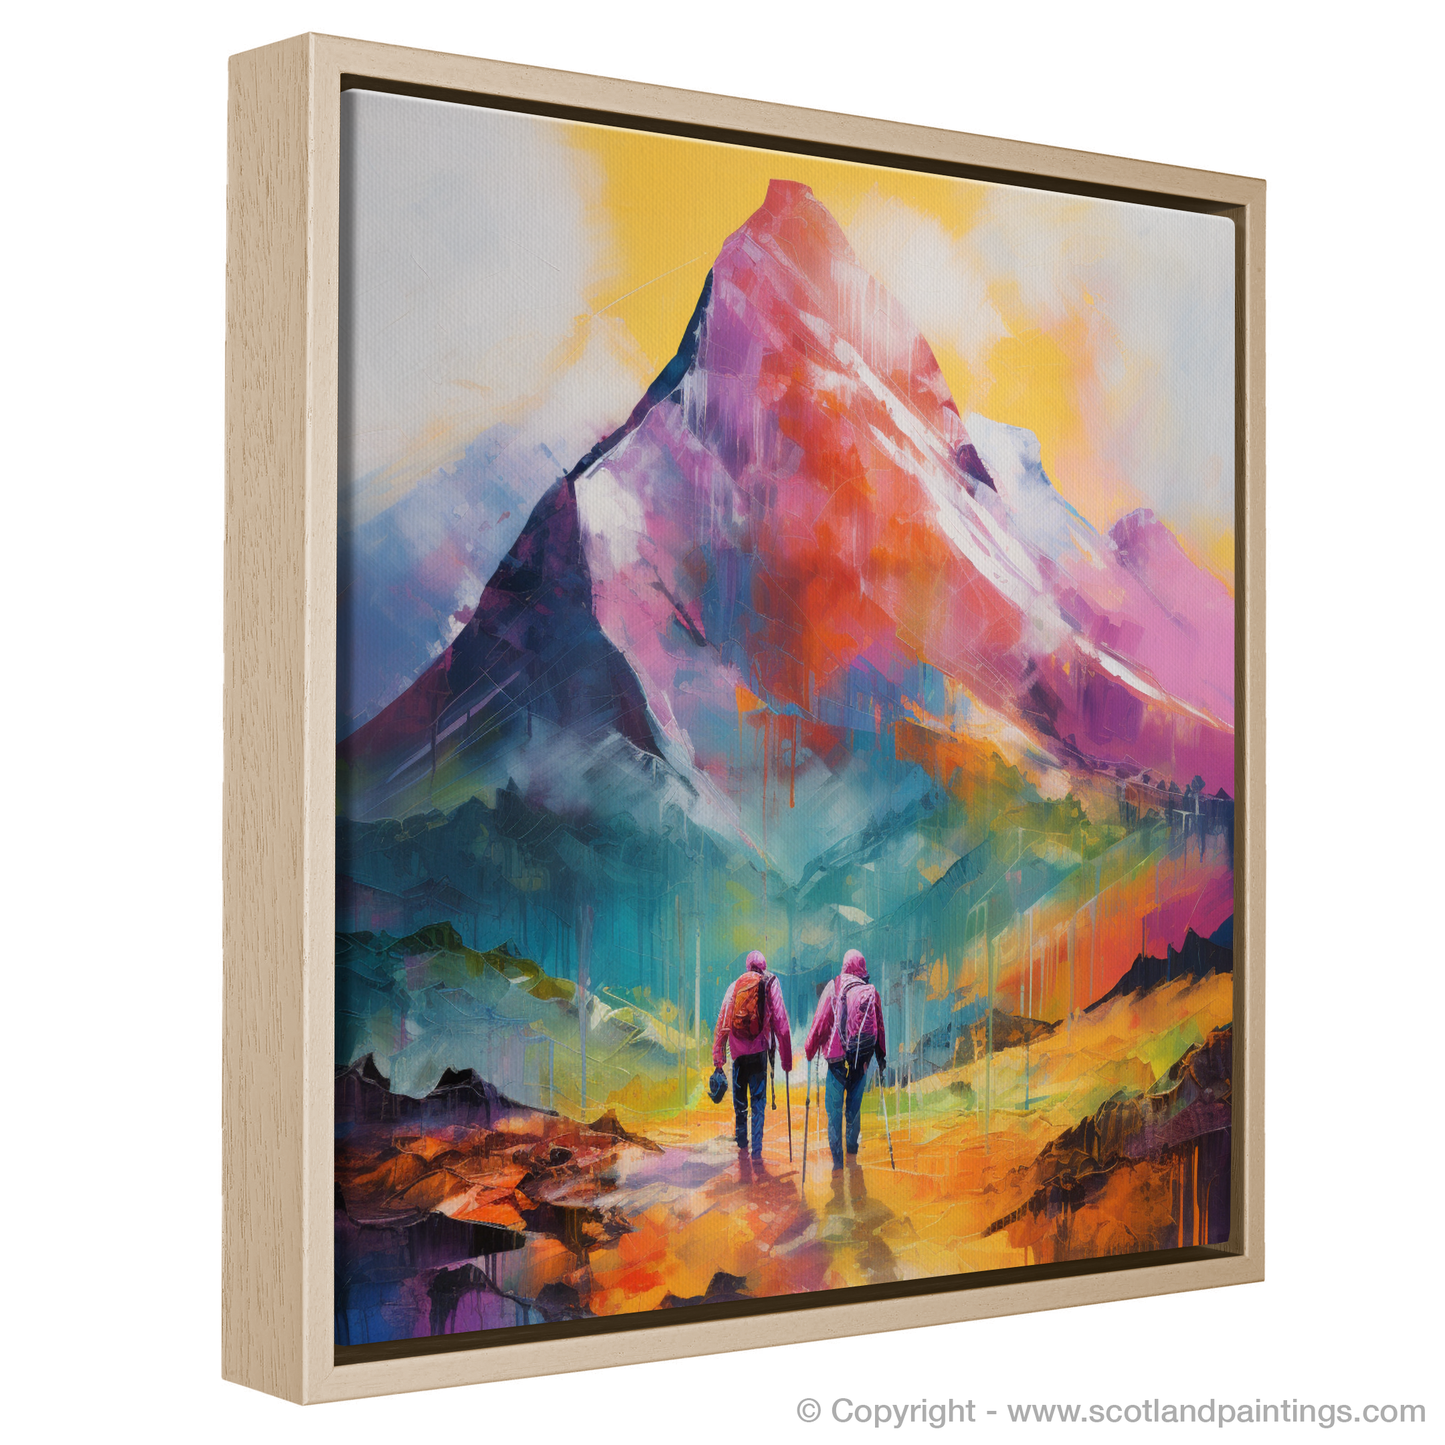 Painting and Art Print of Hikers in Glencoe entitled "Hikers' Journey Through the Colour Fields of Glencoe".